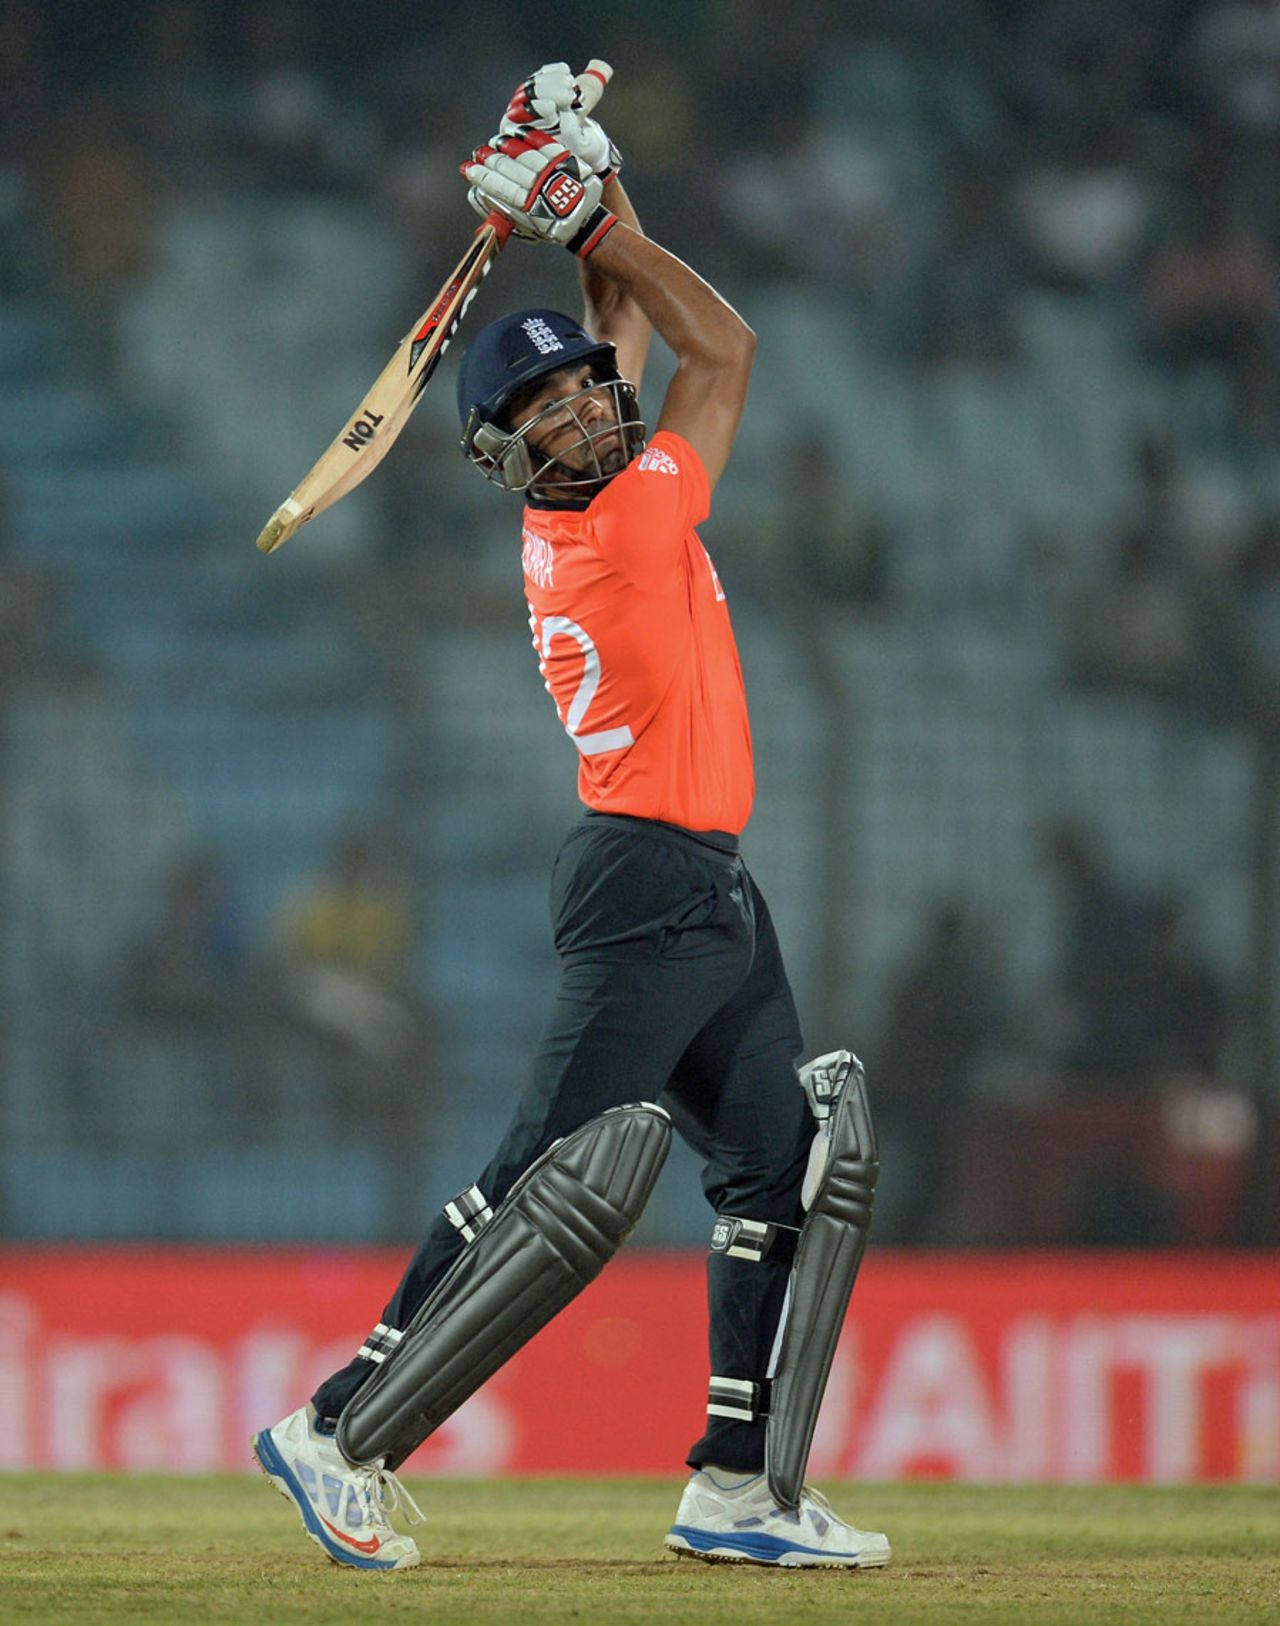 Ravi Bopara takes a swing at the ball, England v South Africa, World Twenty20 2014, Group 1, Chittagong, March 29, 2014